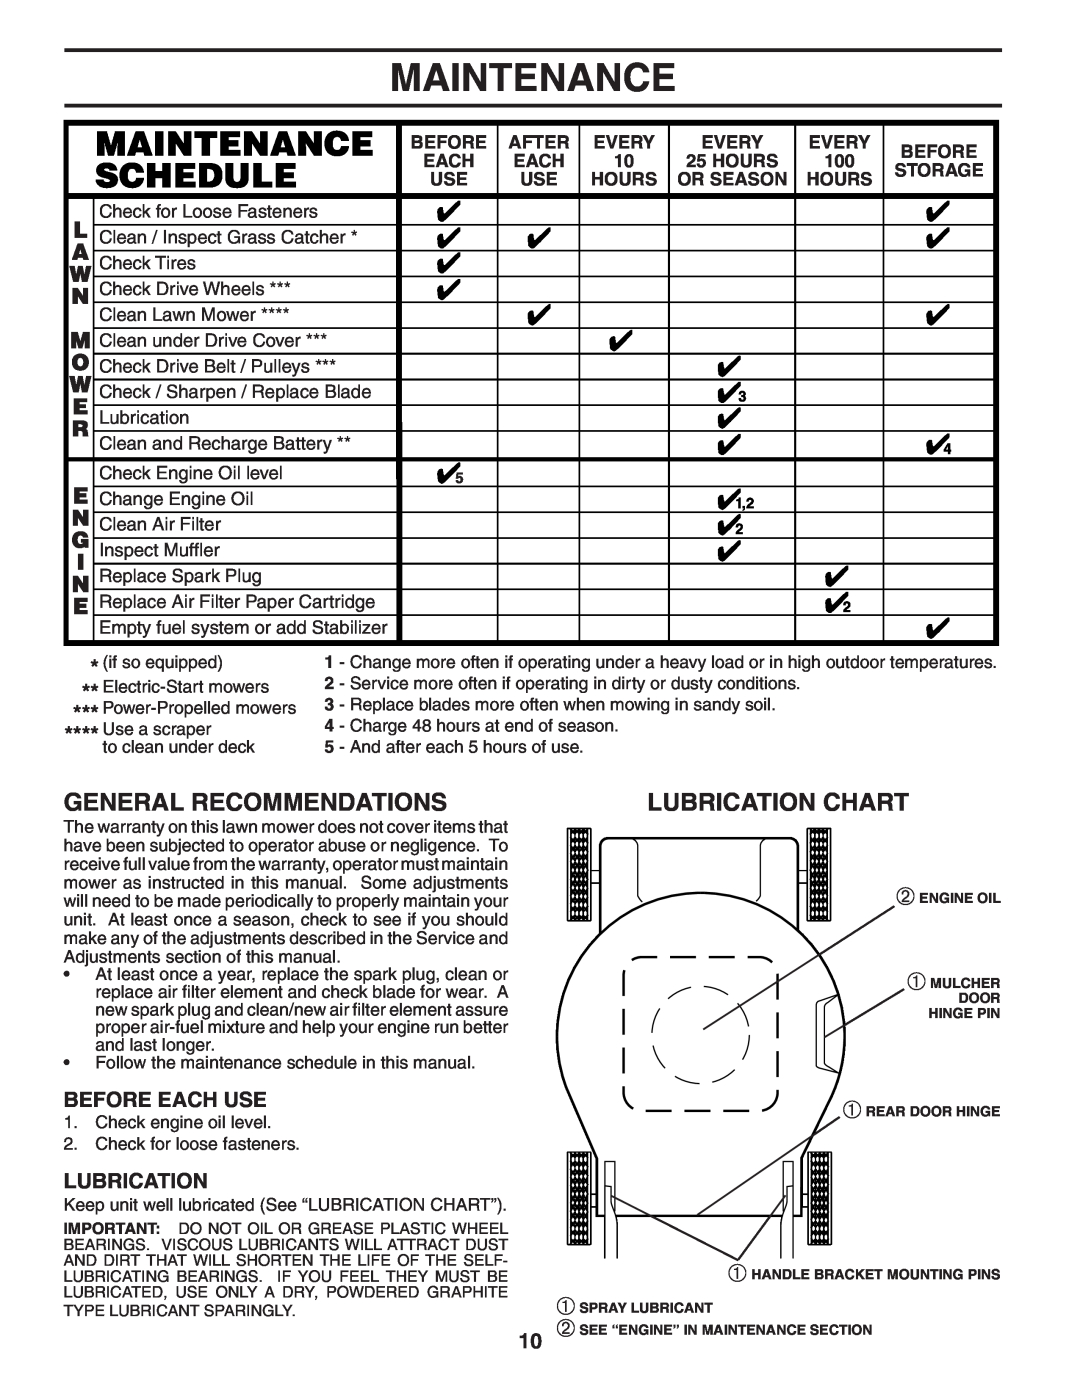 Husqvarna 87521RSX Maintenance, General Recommendations, Lubrication Chart, Before Each Use, After, Every, Hours, Storage 